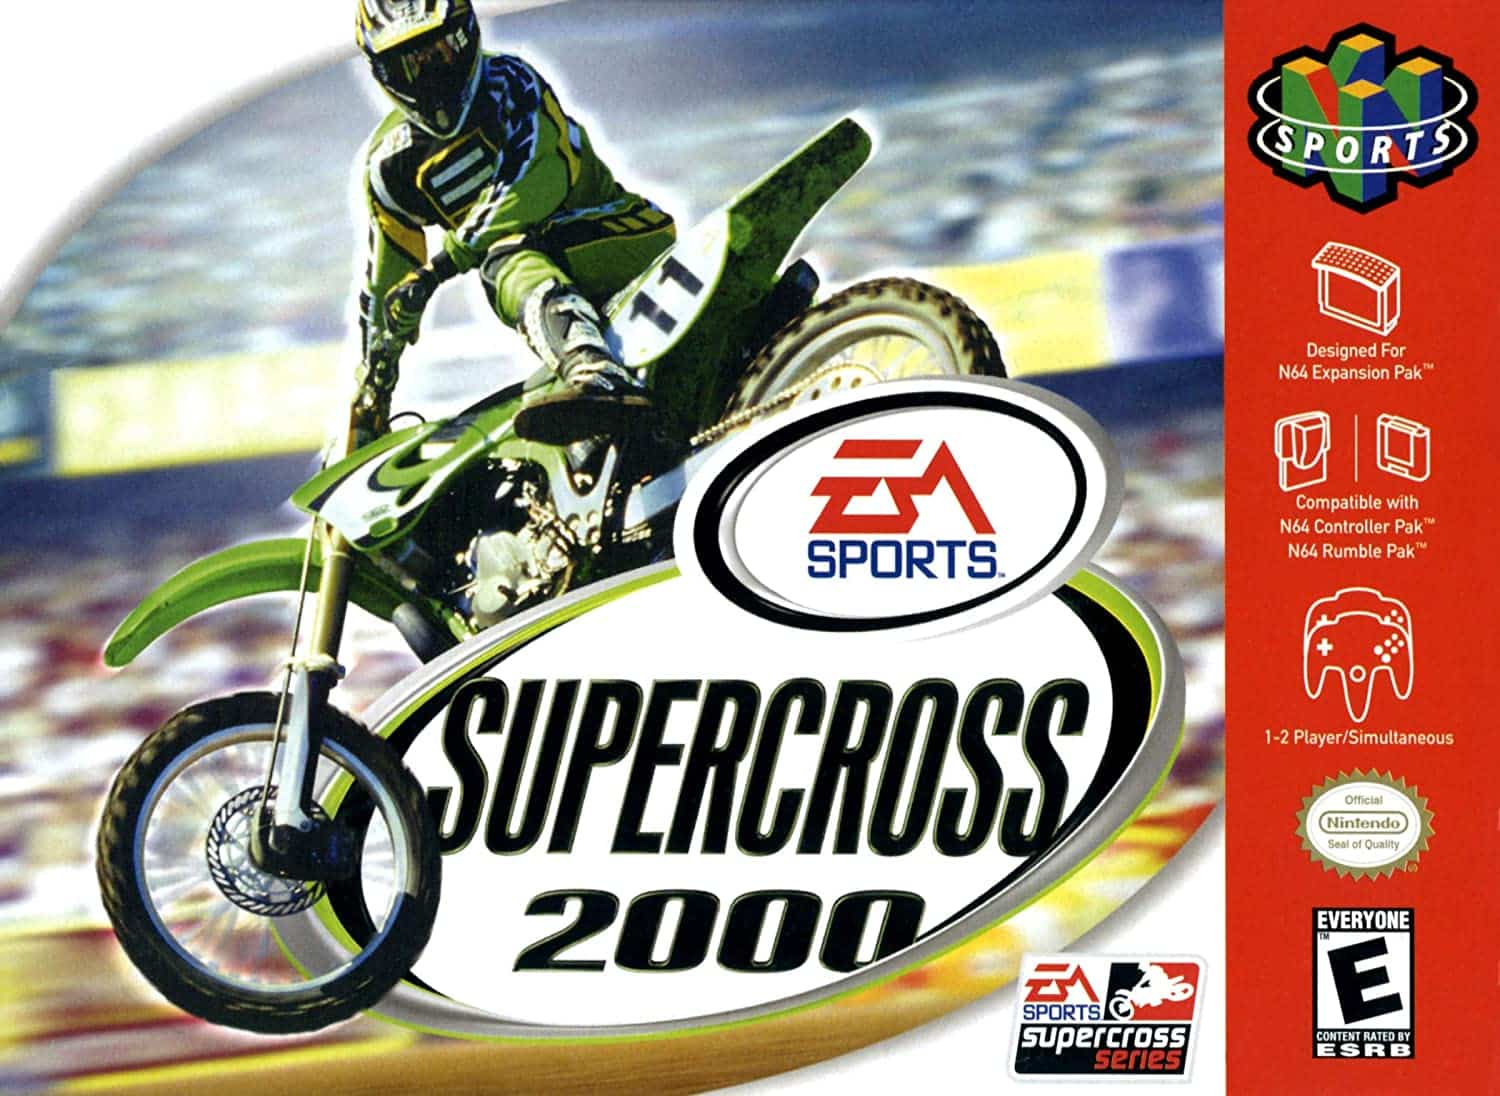 Supercross 2000 player count stats